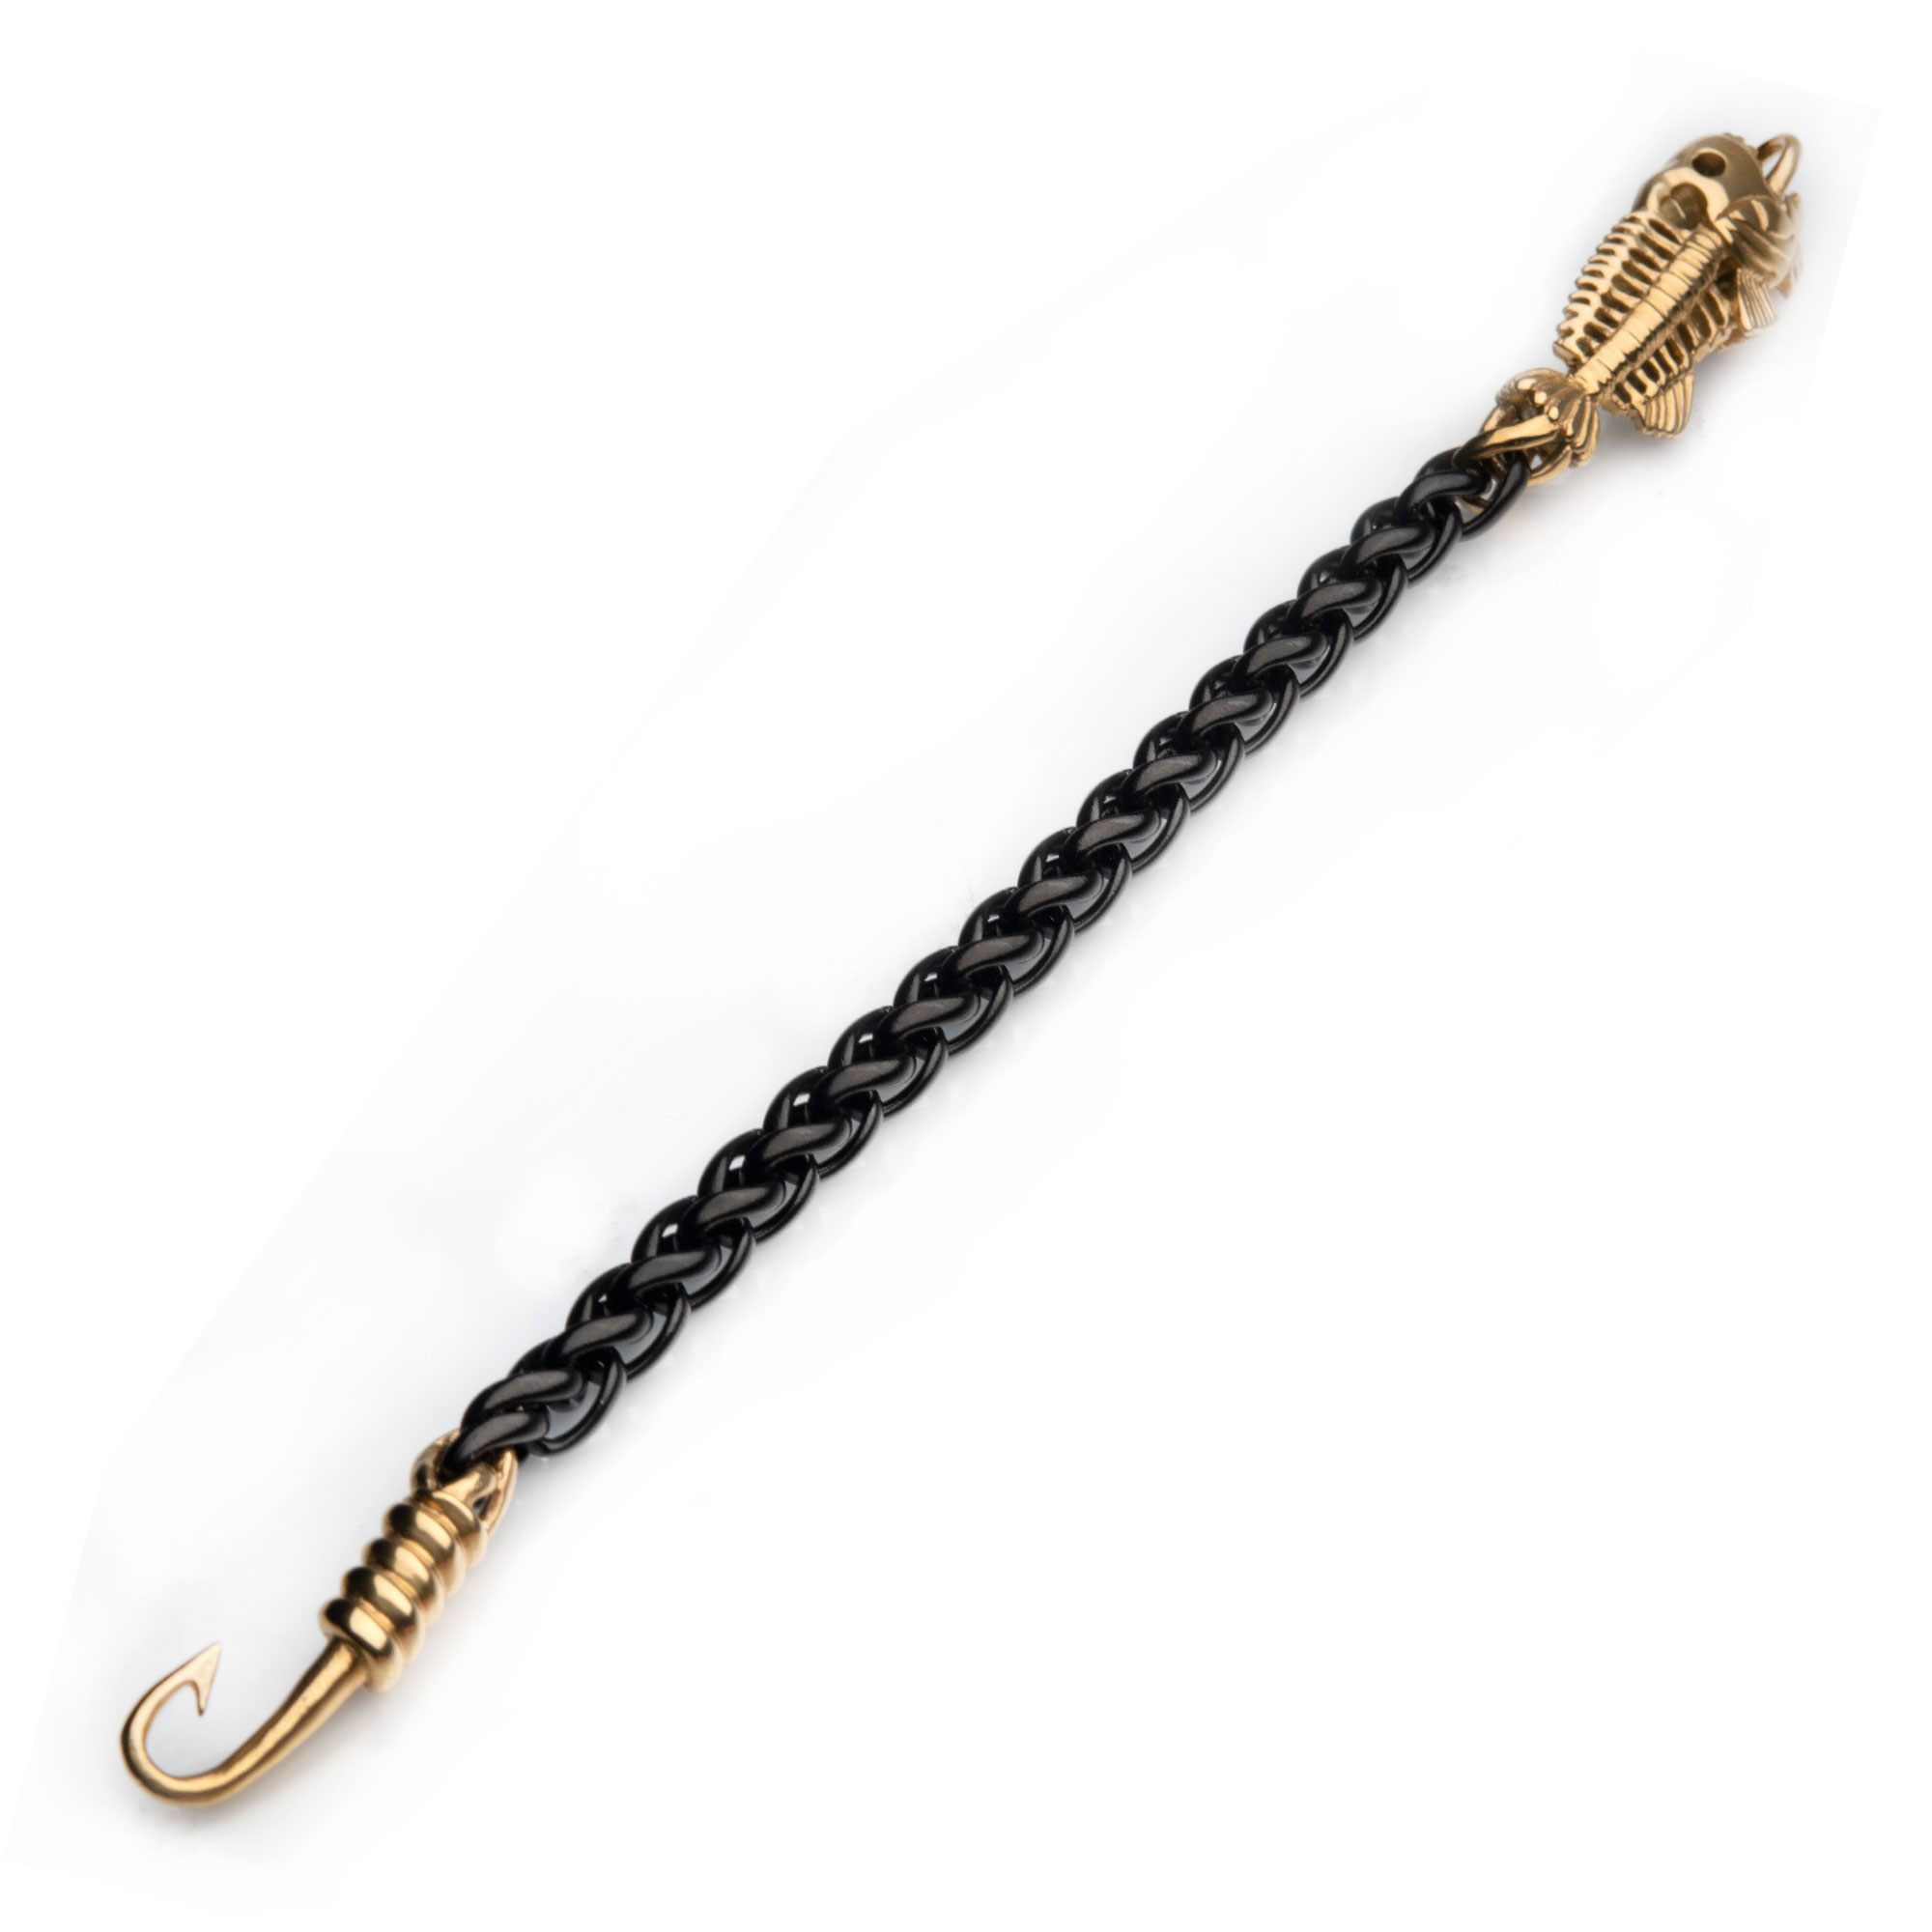 Black Plated Wheat Chain with Gold Plated Fishbone on Hook Clasp Bracelet Image 2 Morin Jewelers Southbridge, MA